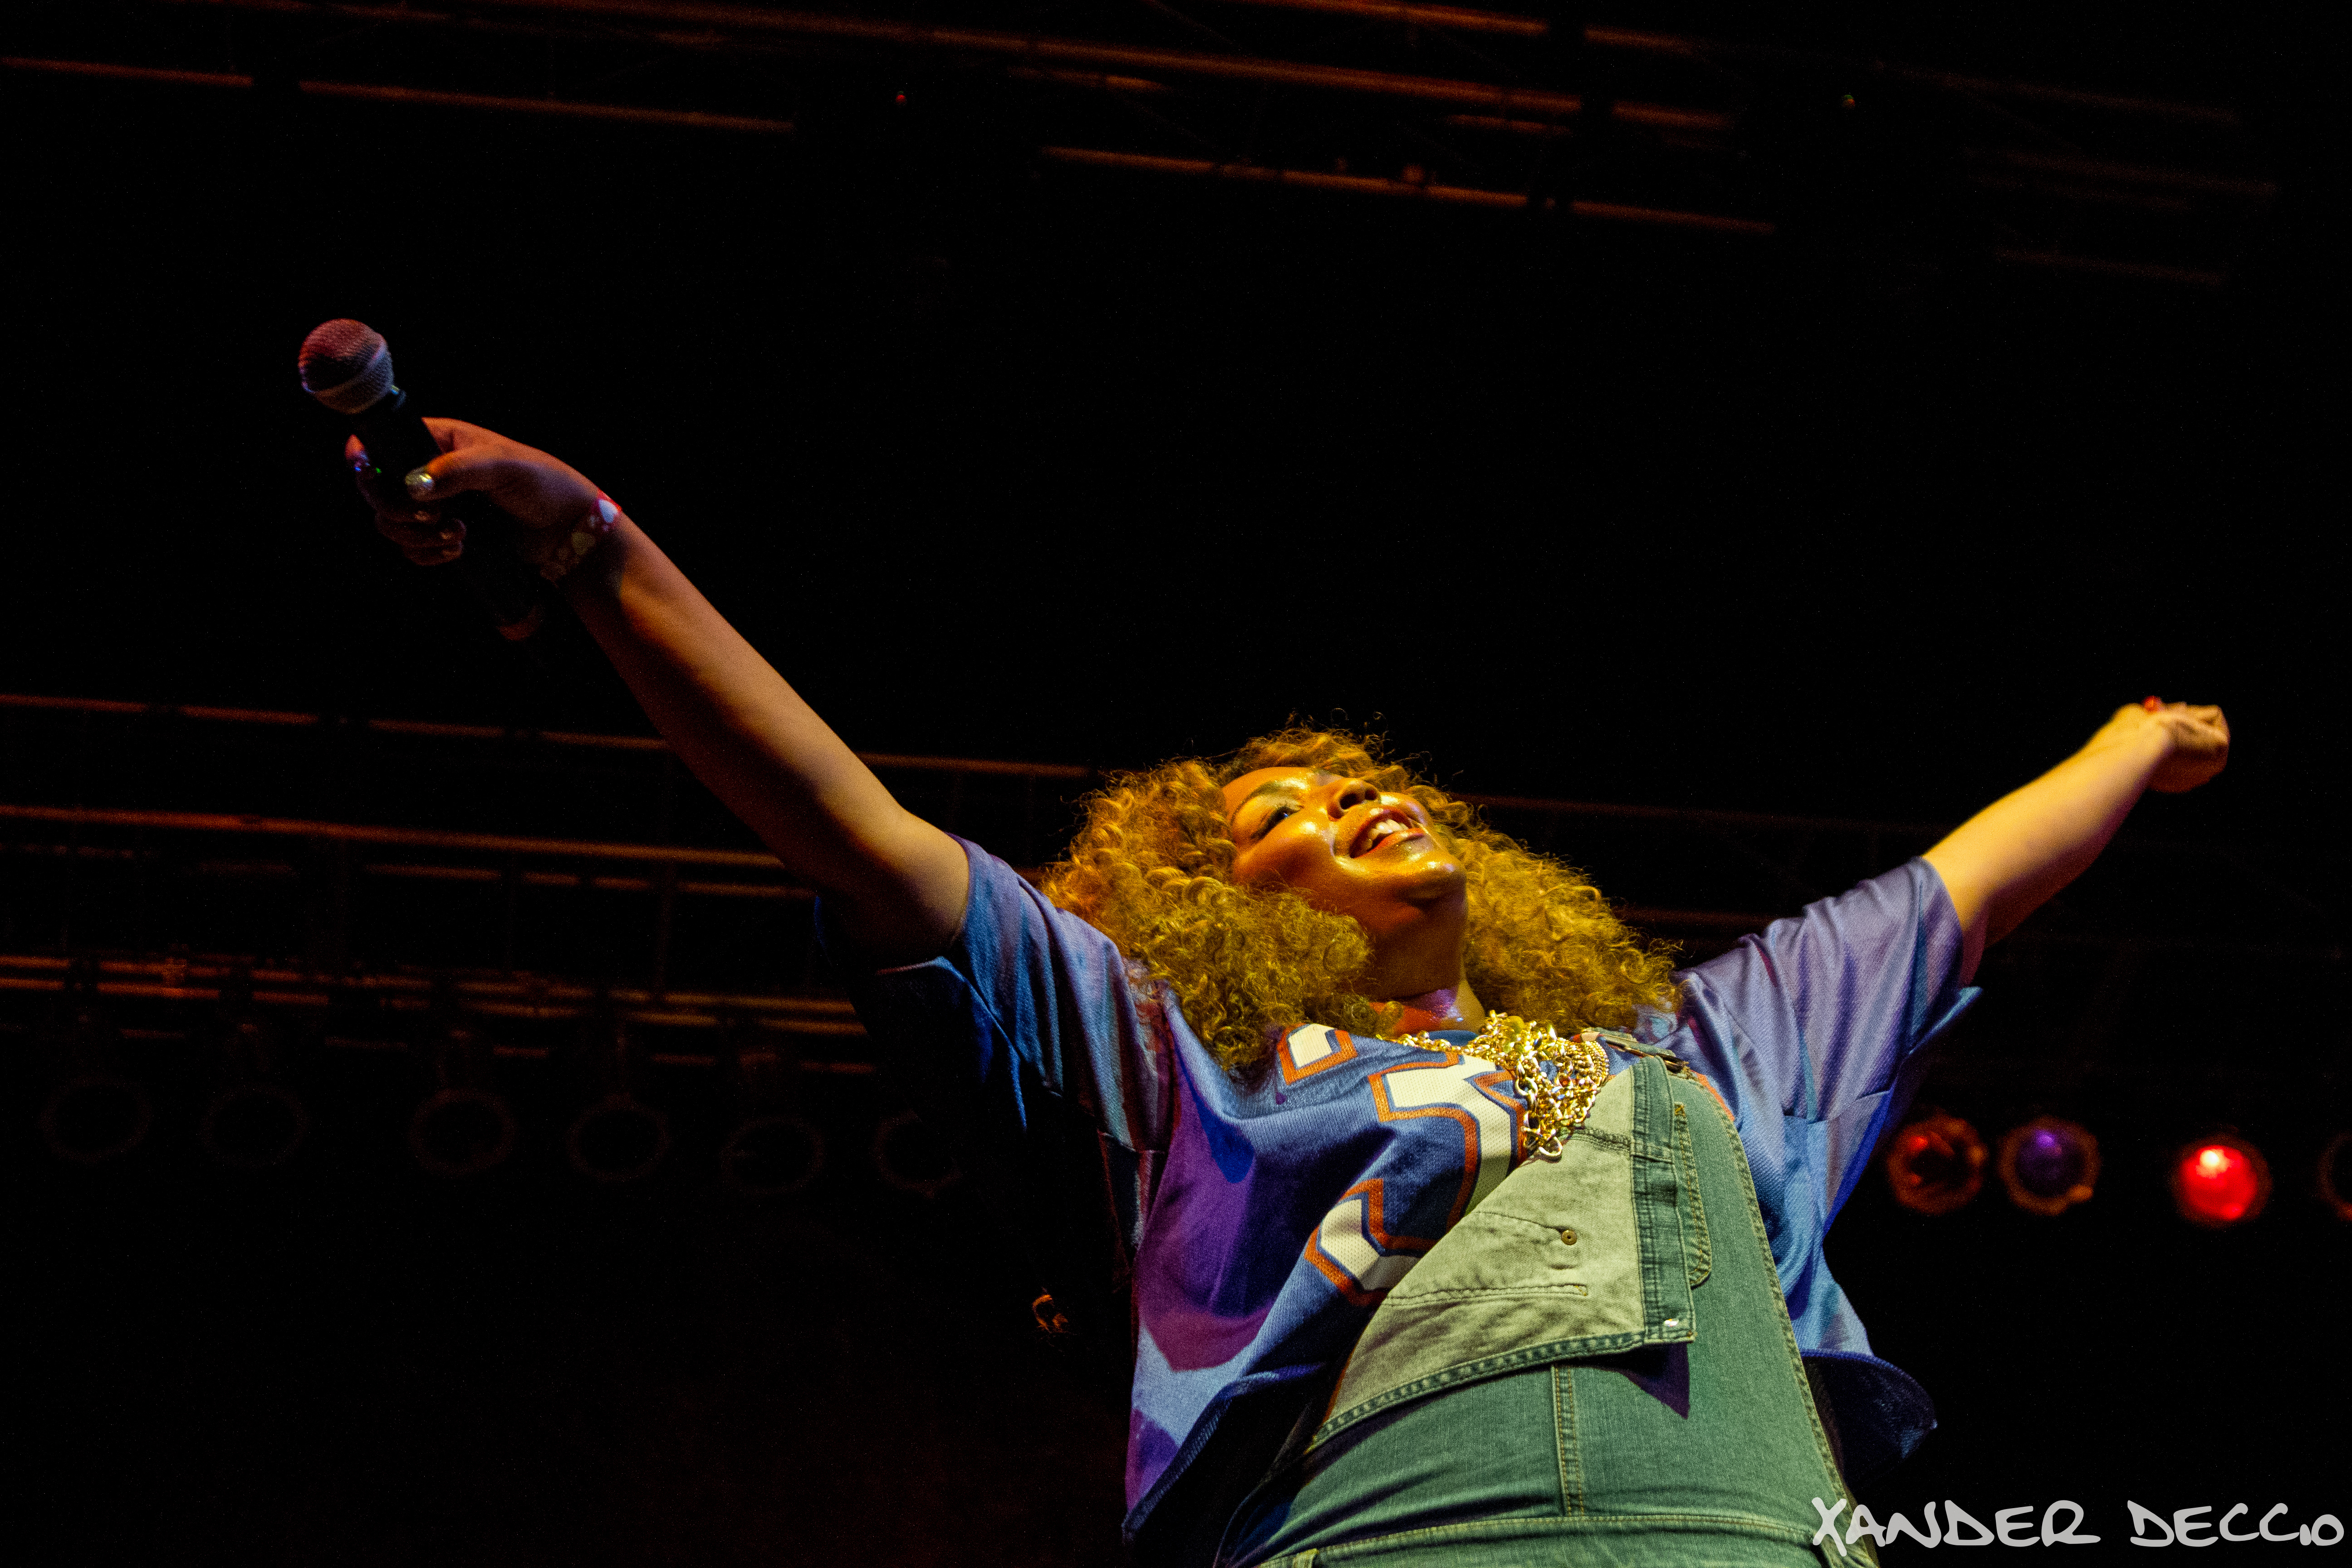 Lizzo @ The Knitting Factory (Photo By Xander Deccio)